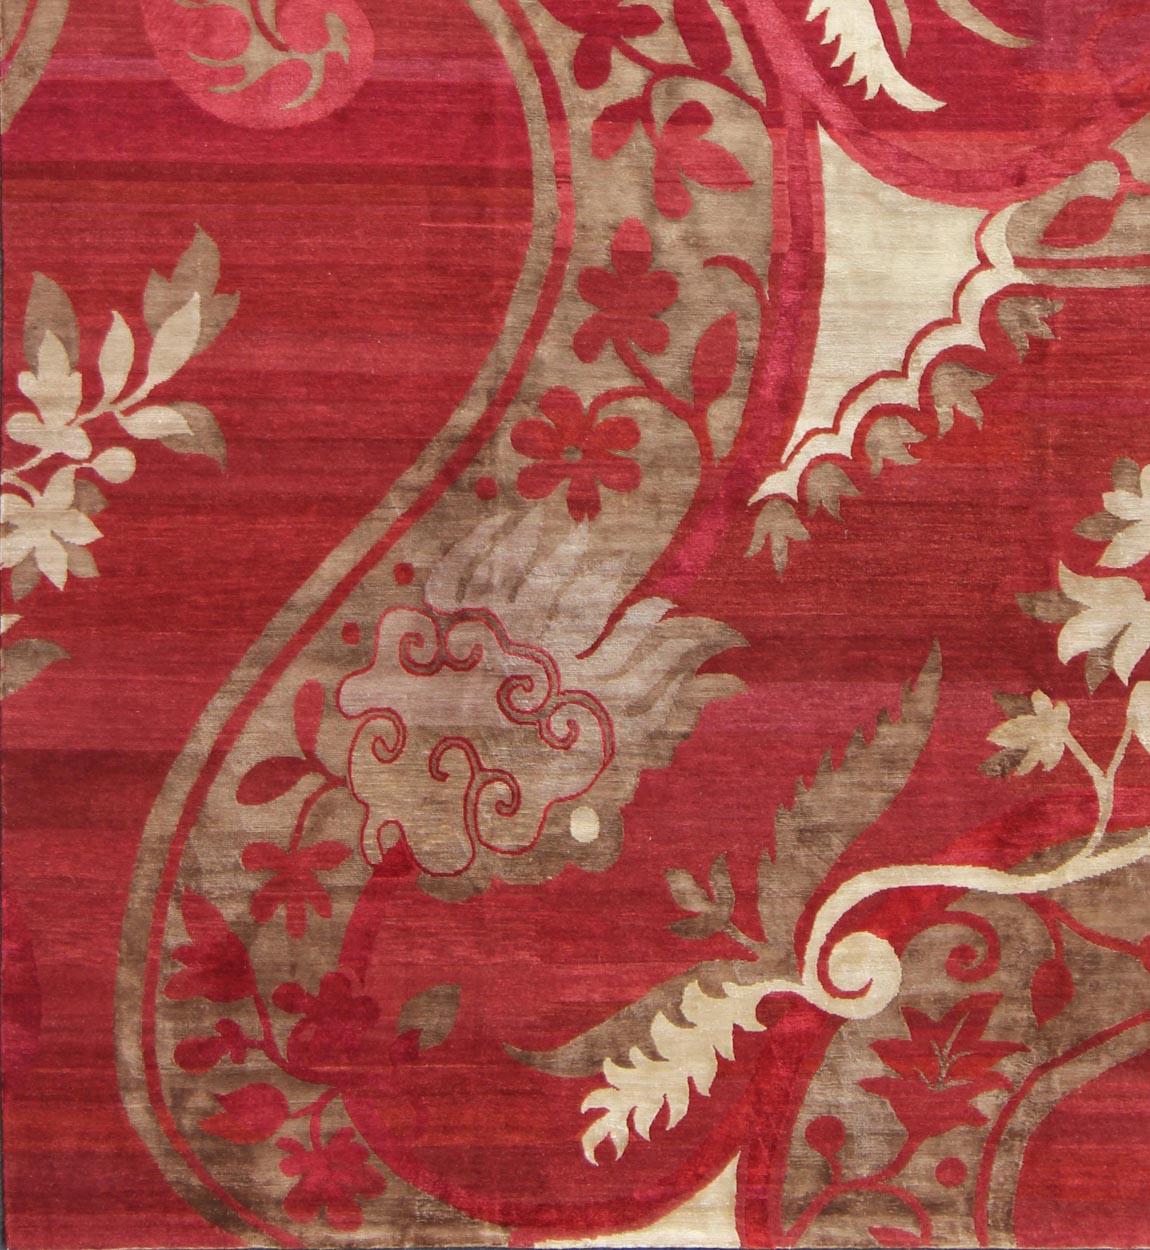 Keivan Woven Arts Modern Silk Rug from Nepal.

Measures: 9' x 11'11

This rug from Nepal was woven with silk and features a unique modern design with flowers and swirling and various blossoms in a rich red color.

Nepalese Modern rug with swirling